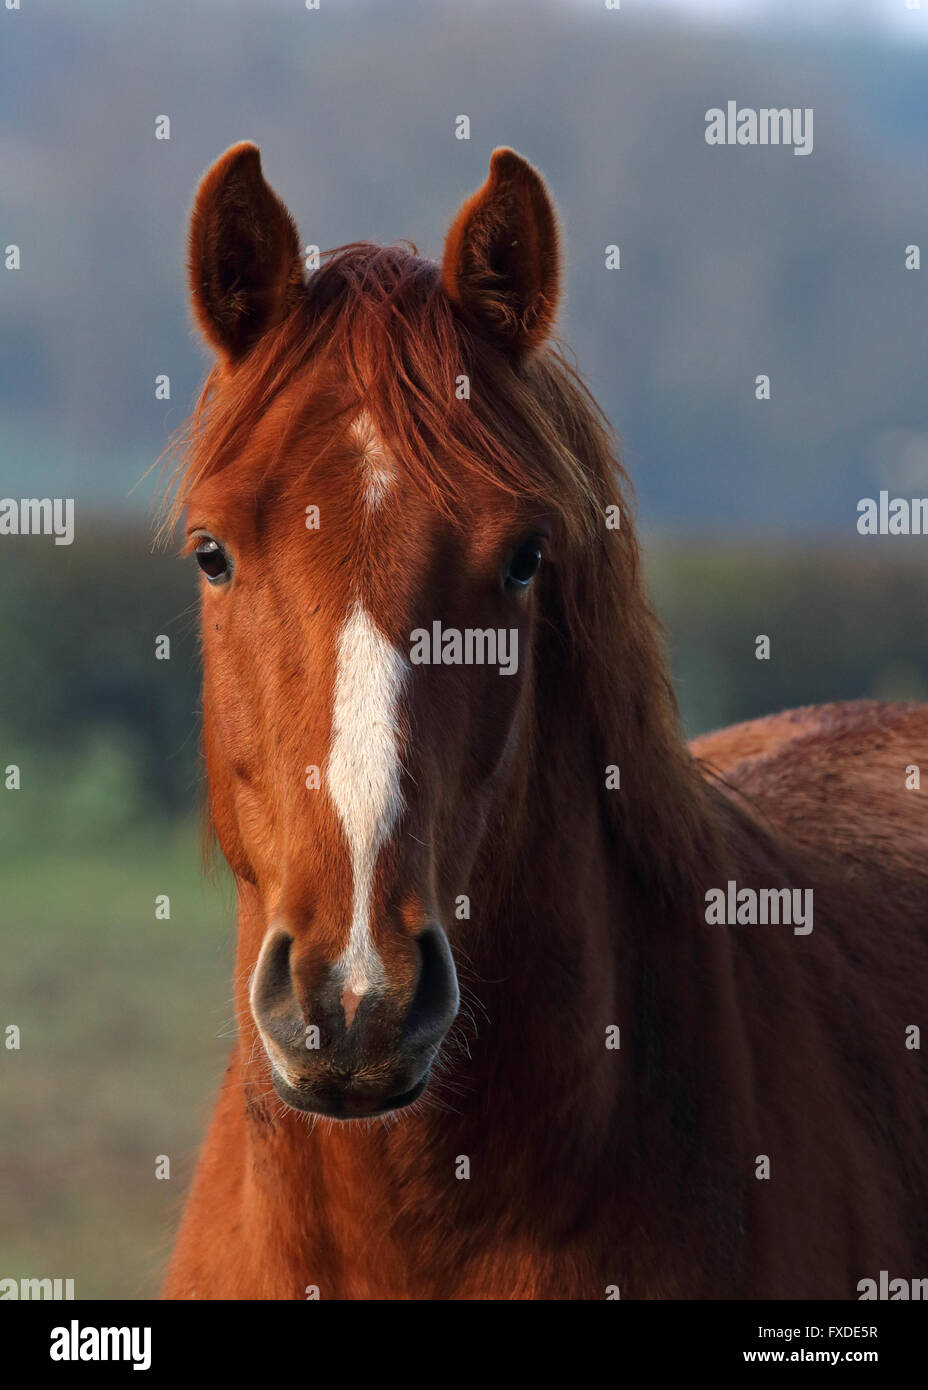 horse portrait image showing the head only Stock Photo